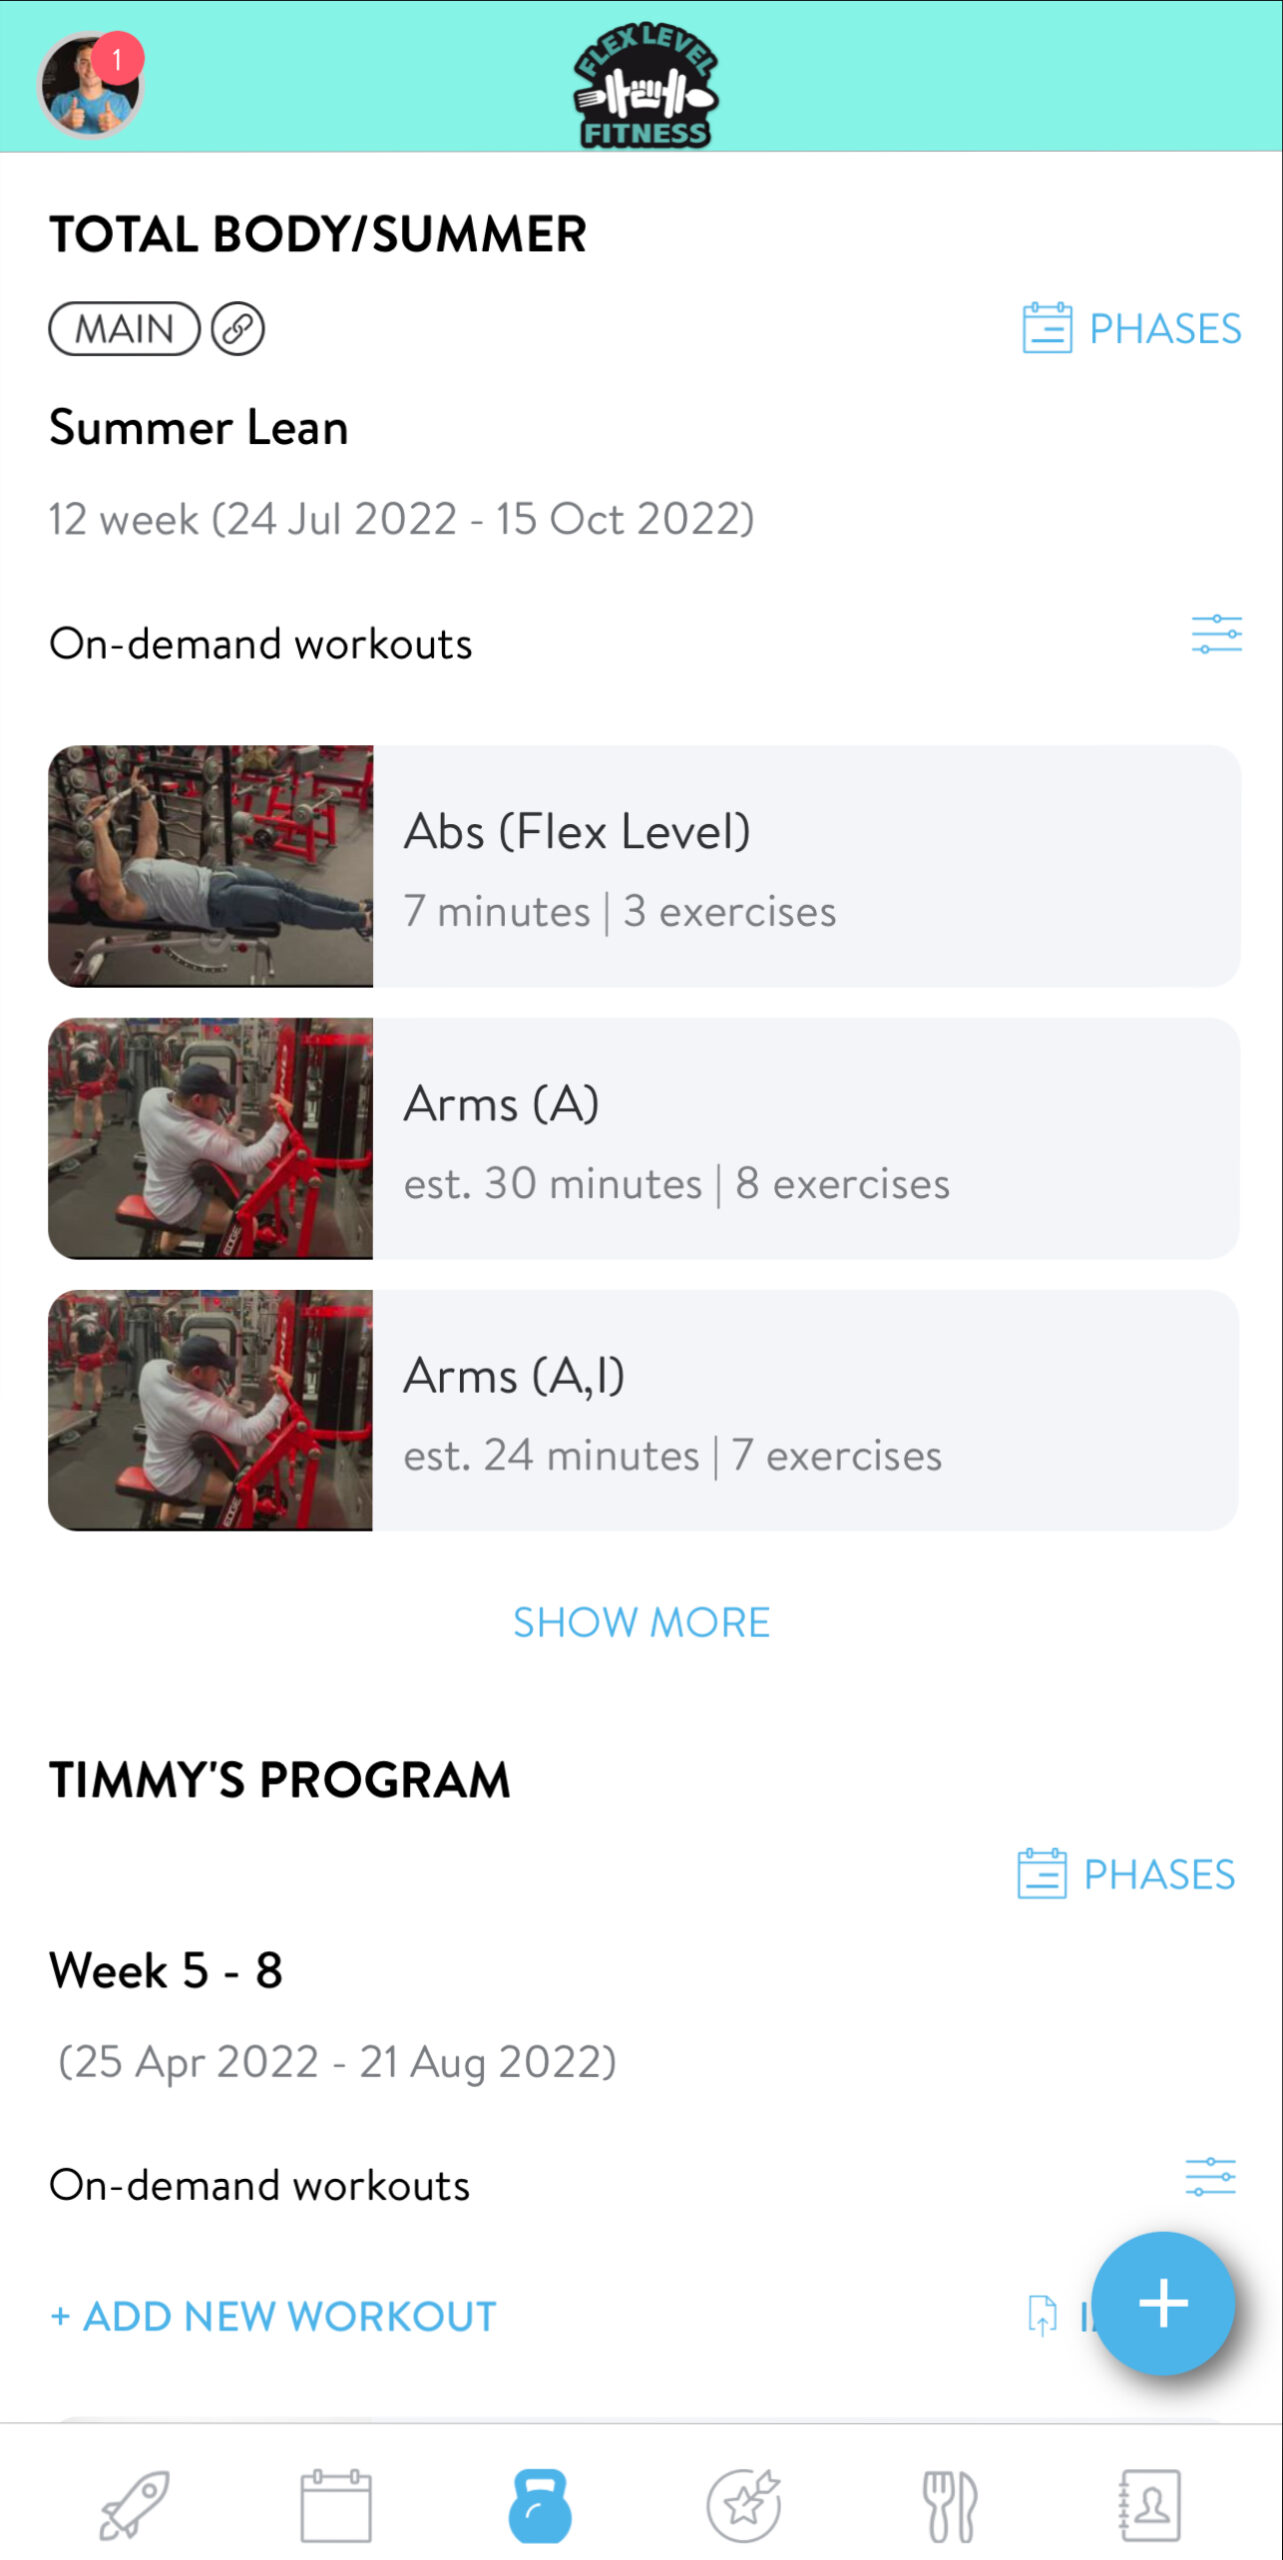 Workout Details and Instructions including Video